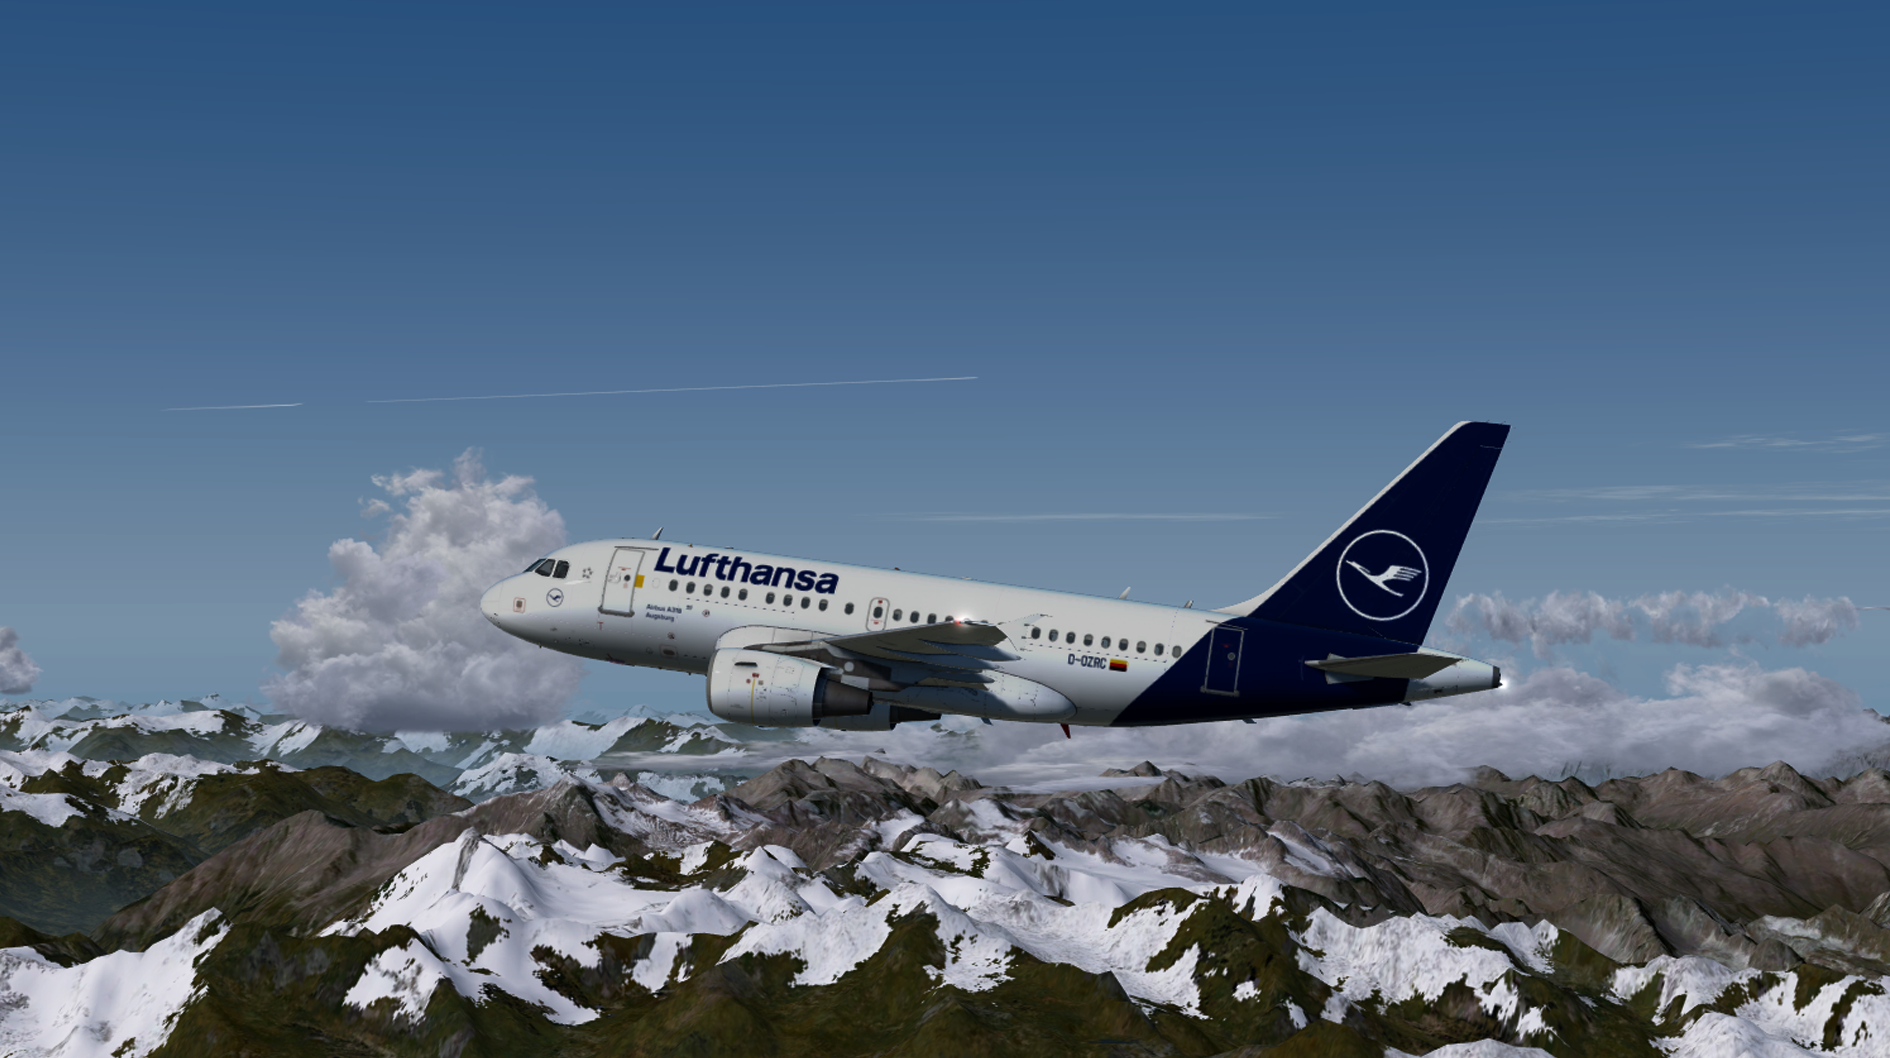 More information about "Lufthansa A318 (Fictional)"